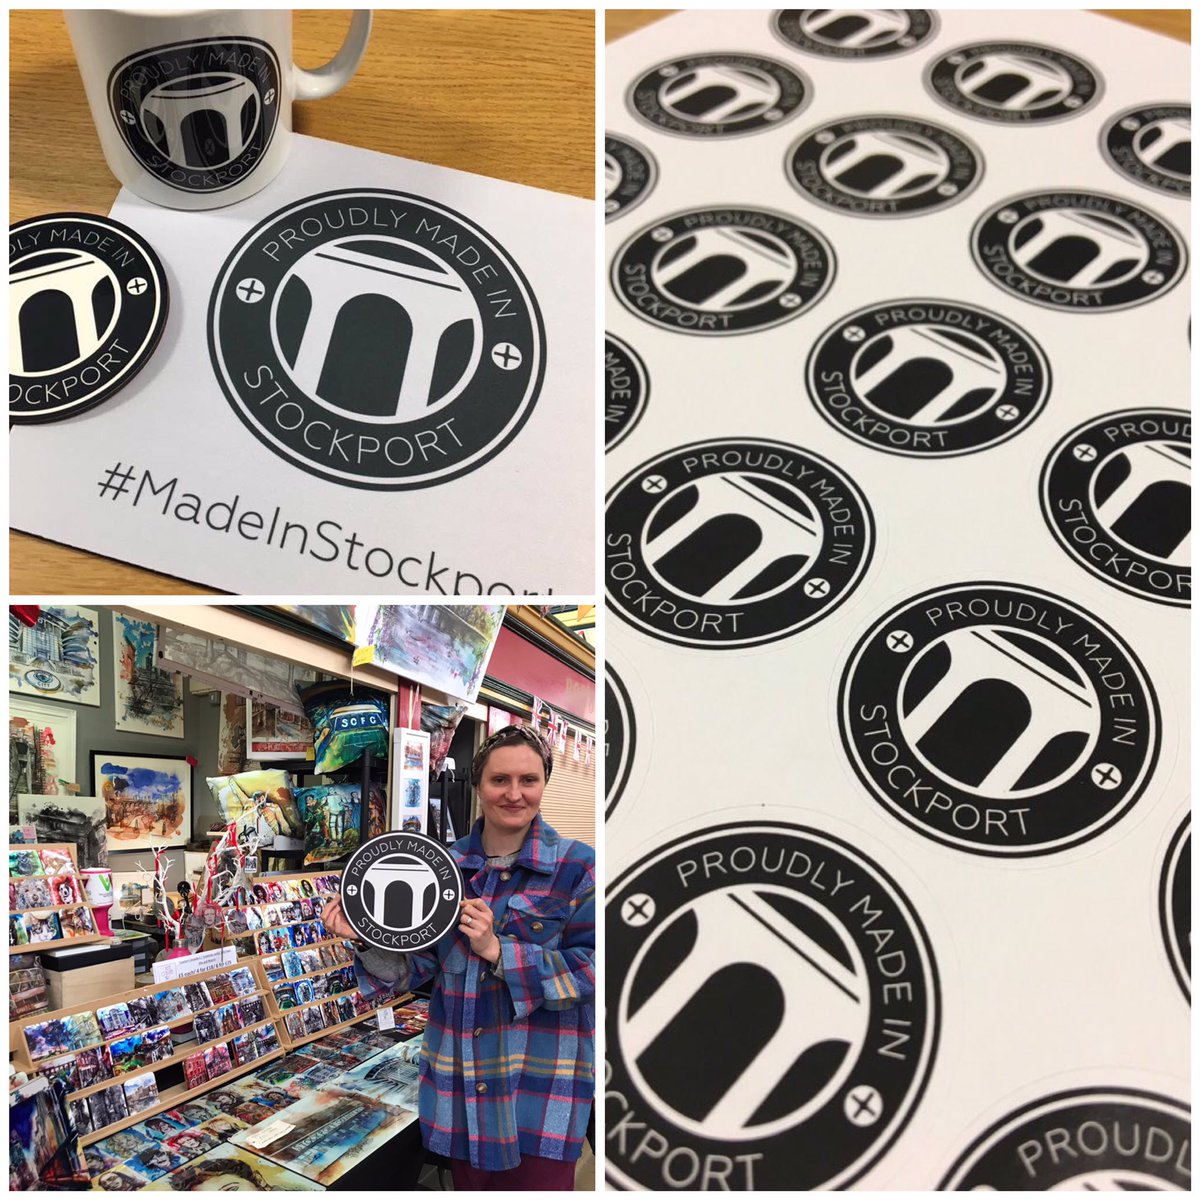 Want to show off that you’re a #crafter, #maker, #artisan based in #Stockport? Take a look at @AquaDesignGroup aquadesigngroup.co.uk/proudly-made-in for the #MadeInStockport badge design. You can purchase #marketing items, such as #stickers too 😊 #SBS #BizBubble #SmartSocial #PromoteStockport